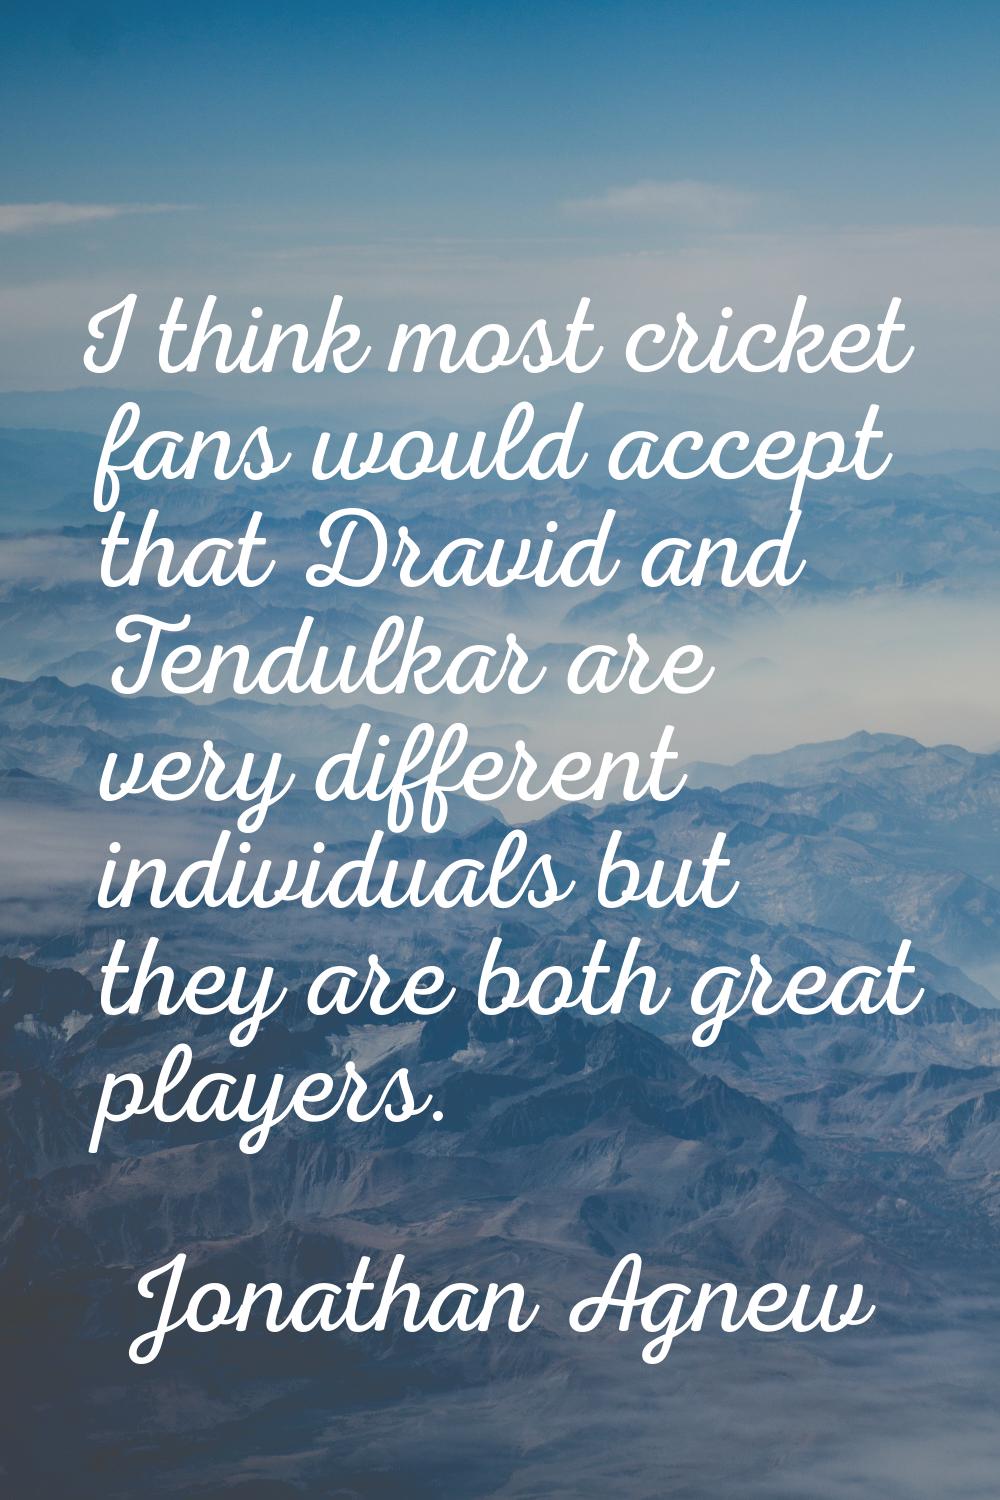 I think most cricket fans would accept that Dravid and Tendulkar are very different individuals but